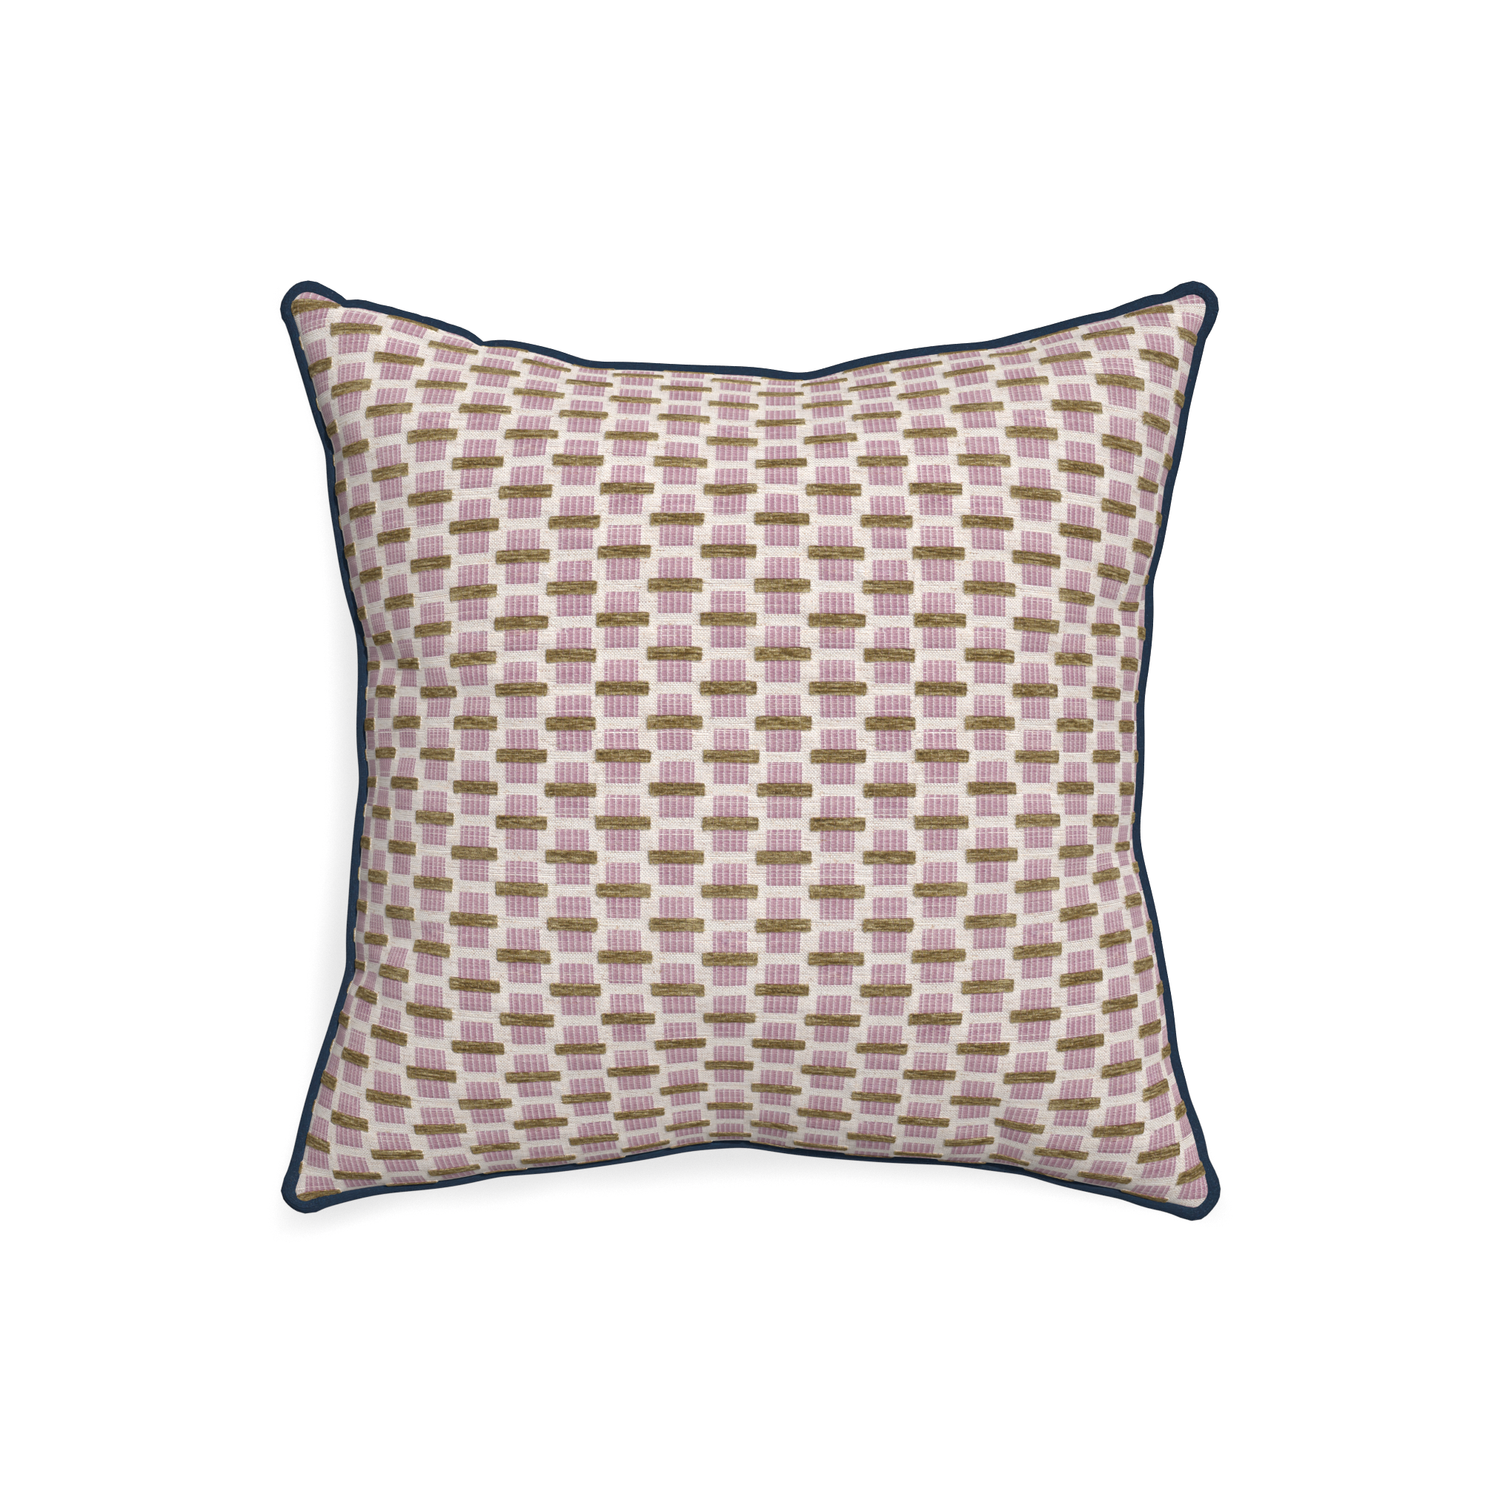 20-square willow orchid custom pink geometric chenillepillow with c piping on white background